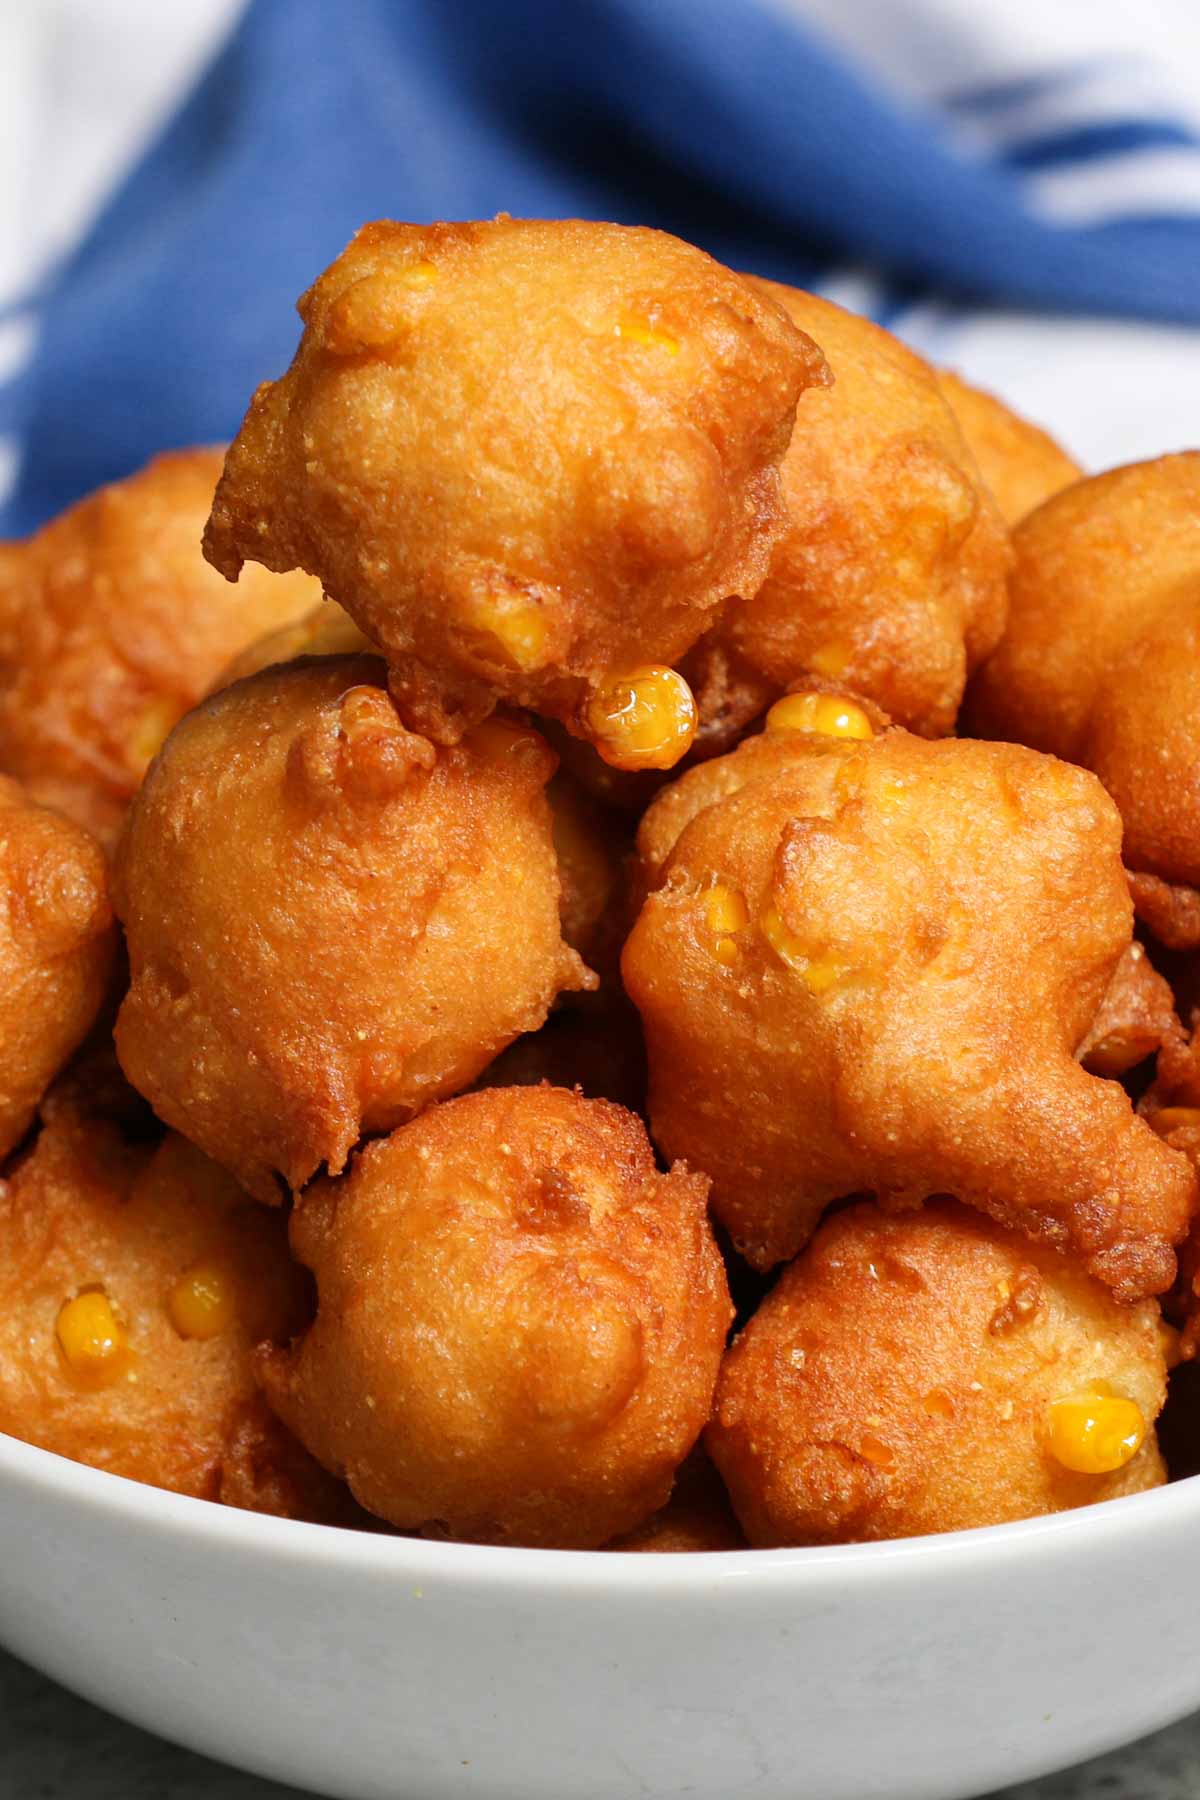 If you like corn fritters, you’ll love these Homemade Crispy Corn Nuggets. Make a quick batter by combining fresh or canned corn with a few kitchen staples, then fry them to golden perfection. This Southern fried corn nugget recipe is perfect for an appetizer, dessert, or side dish.